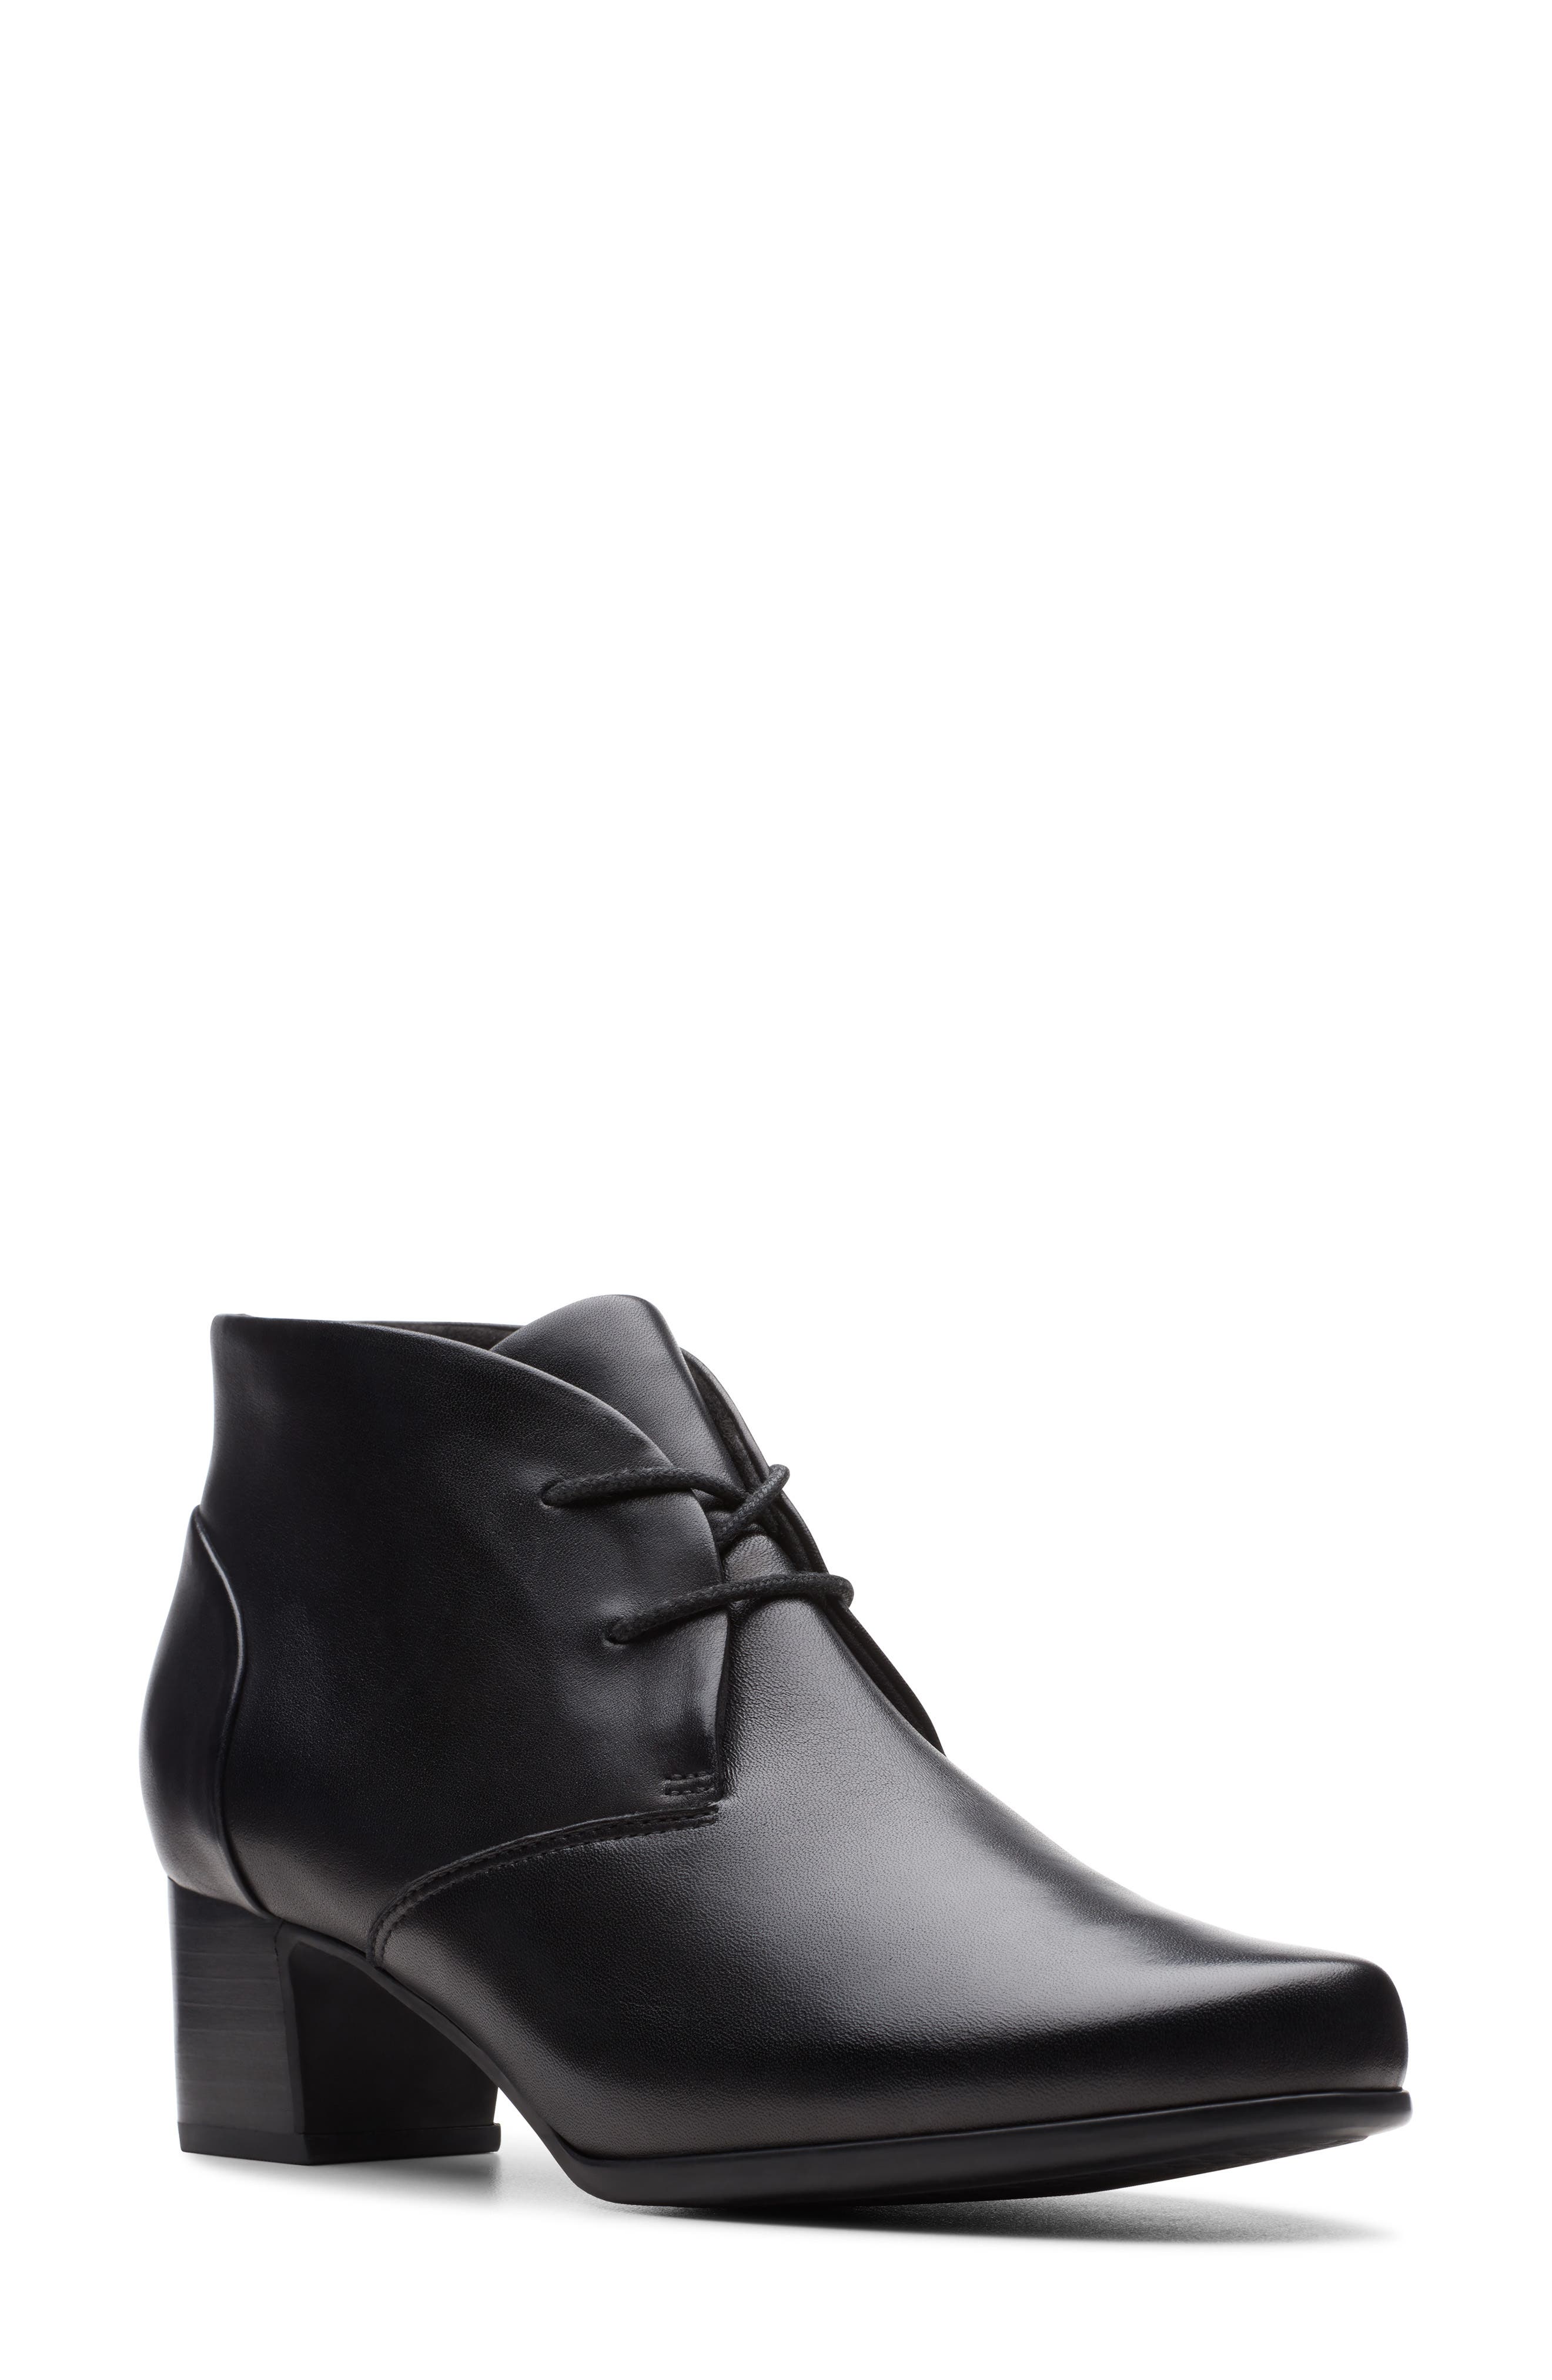 clark lace up boots